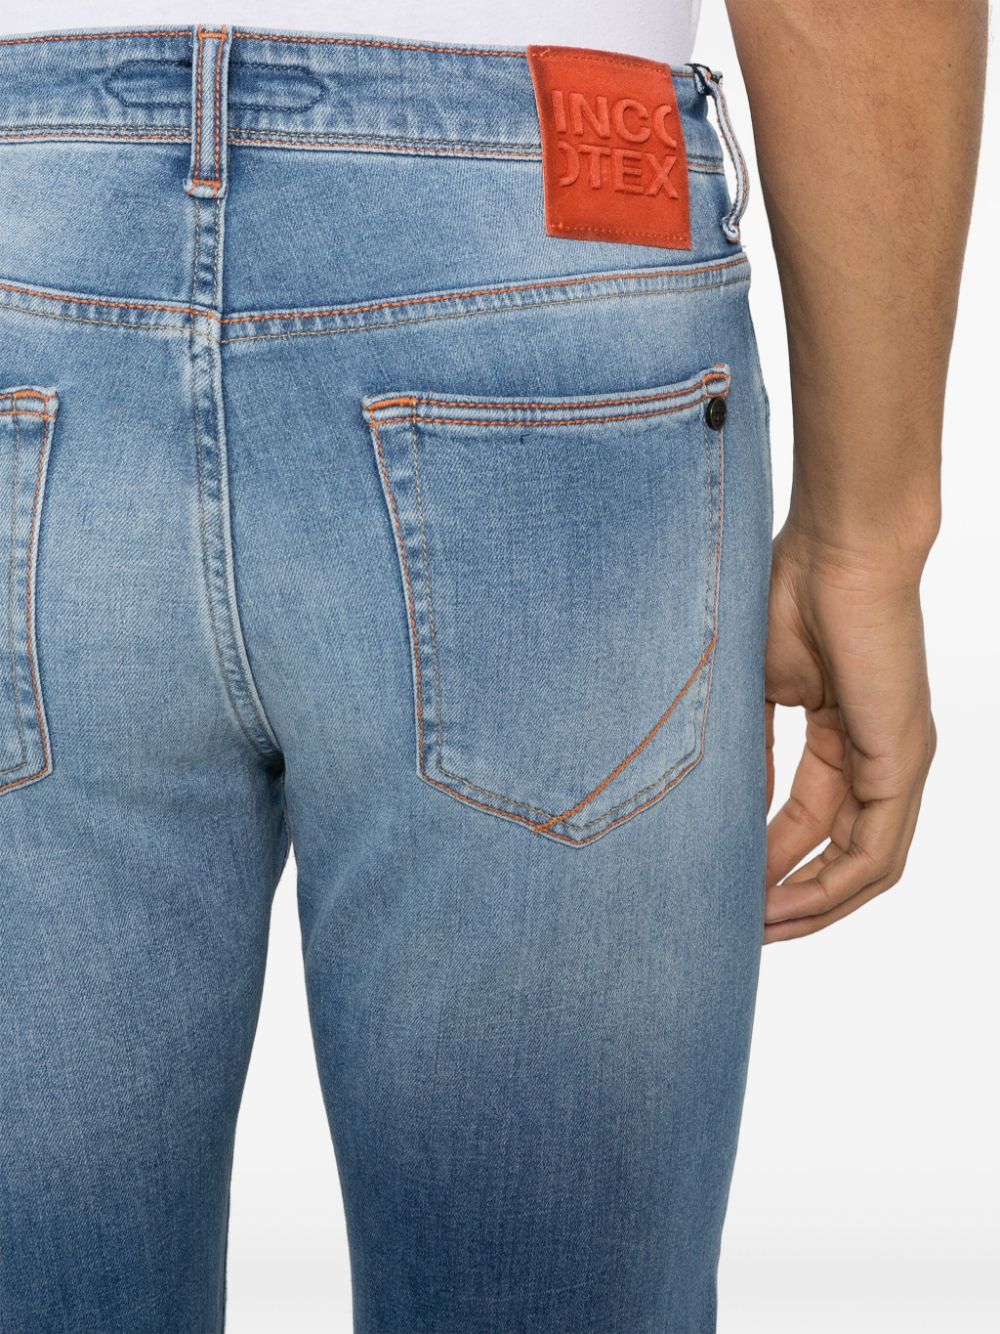 Incotex Jeans met contrasterend stiksel Blauw